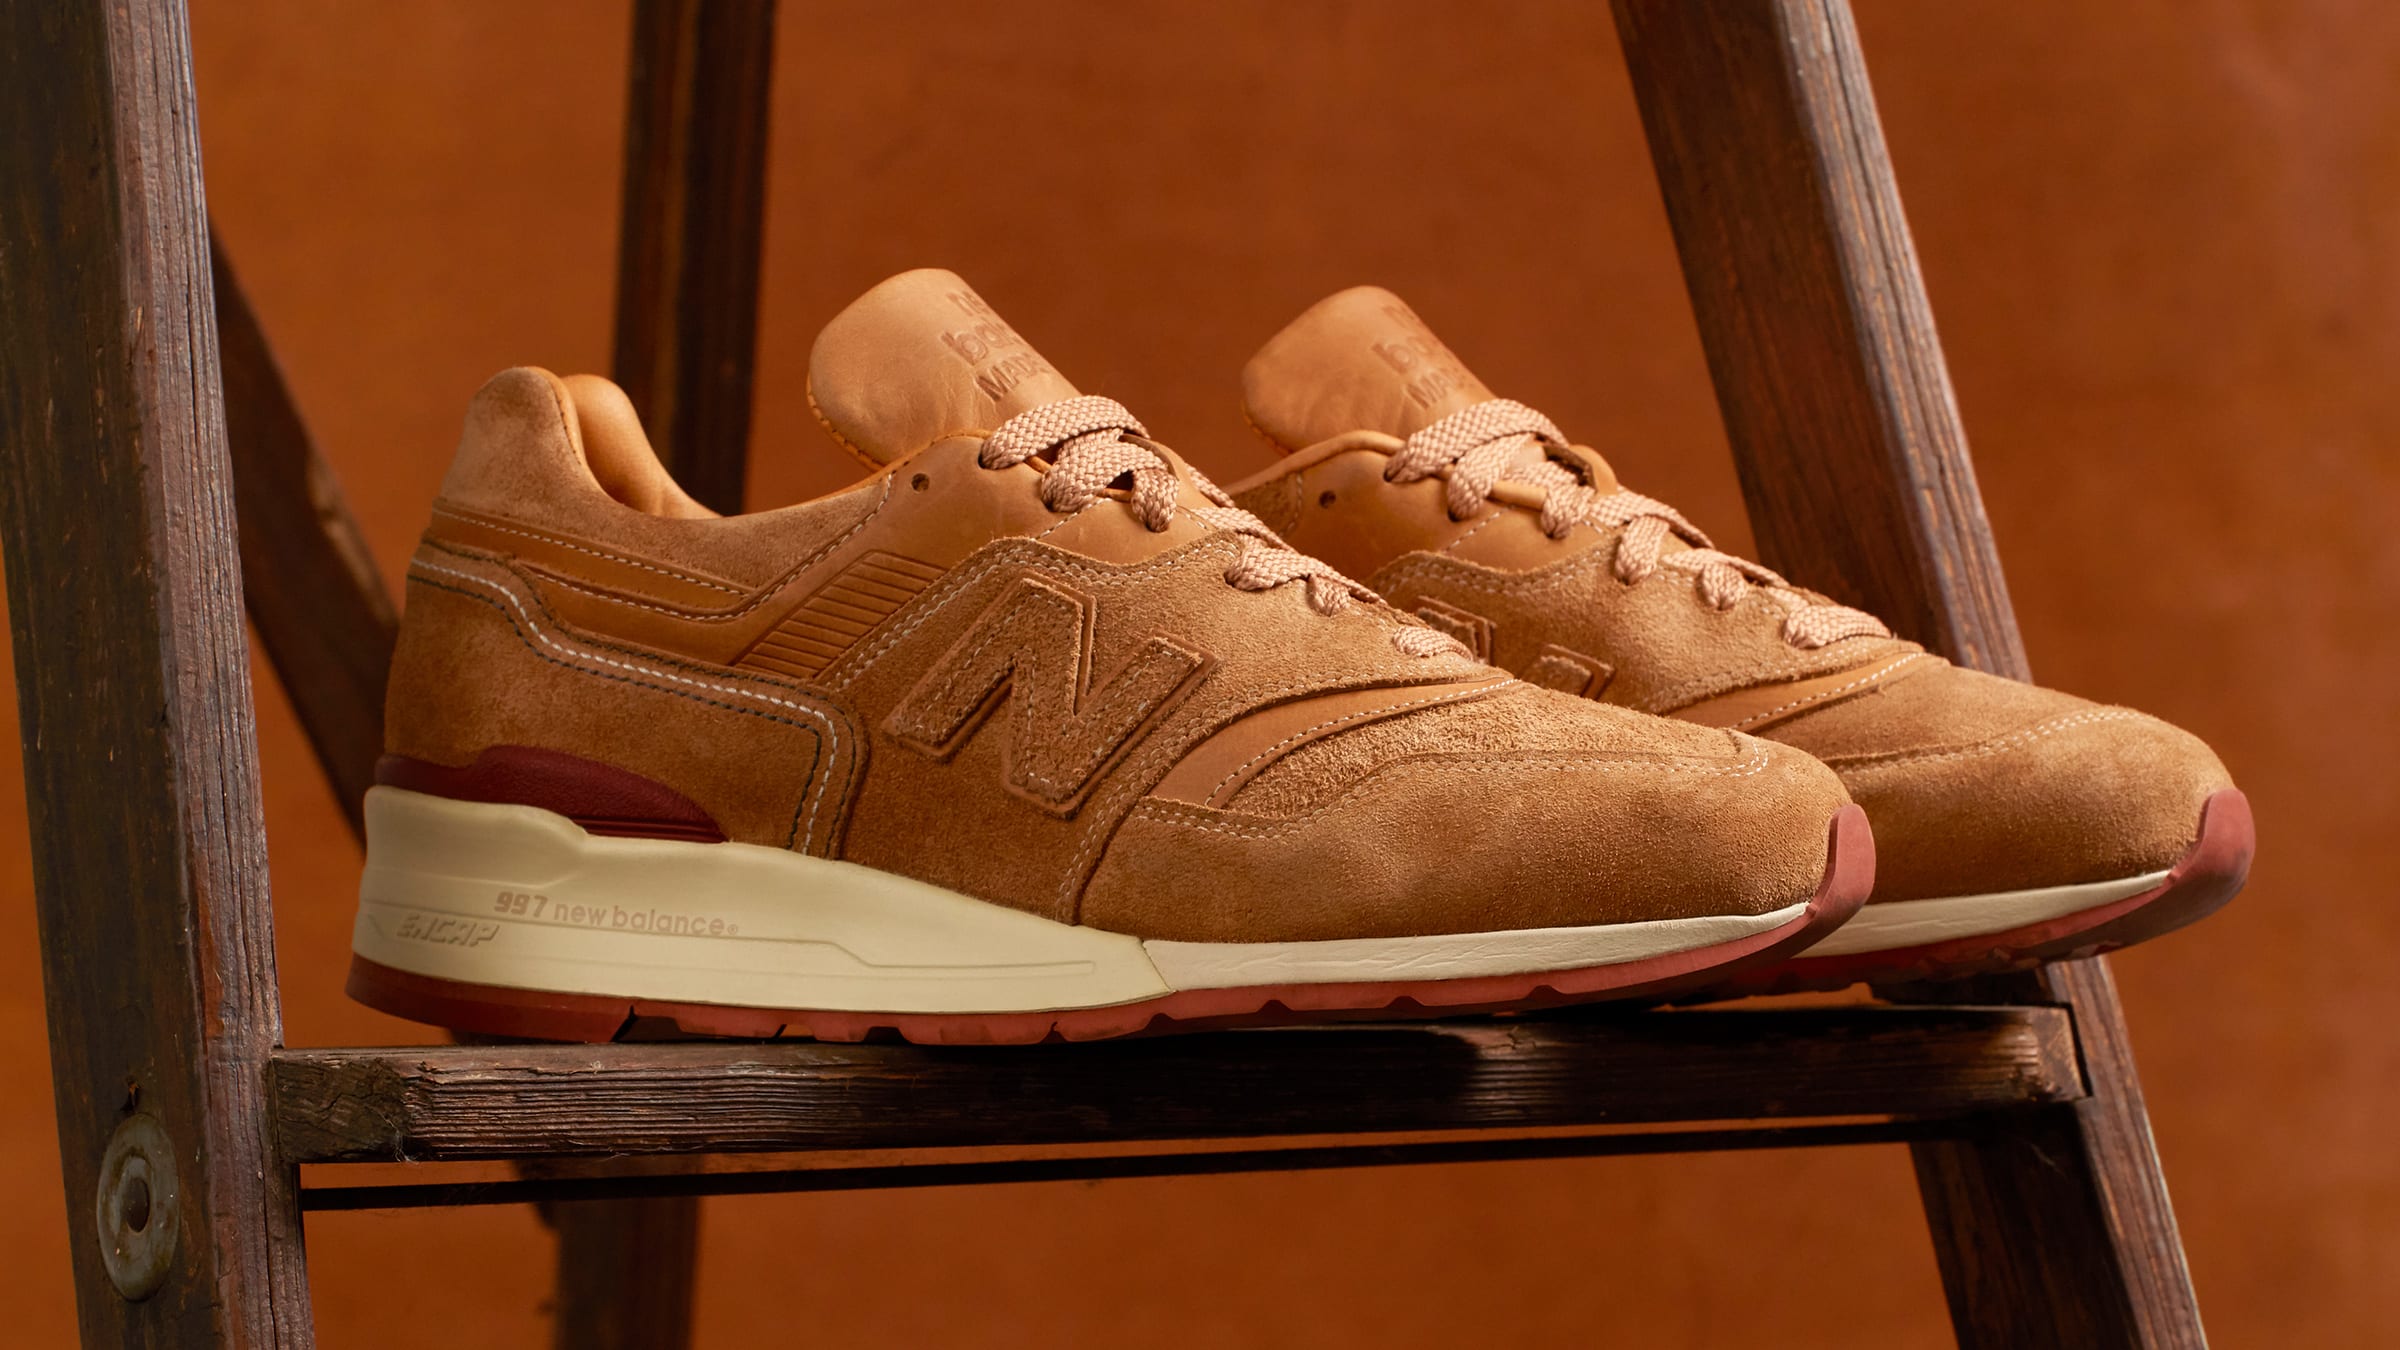 New Balance x Red Wing M997RW - Made in the USA (Tan) | END. Launches